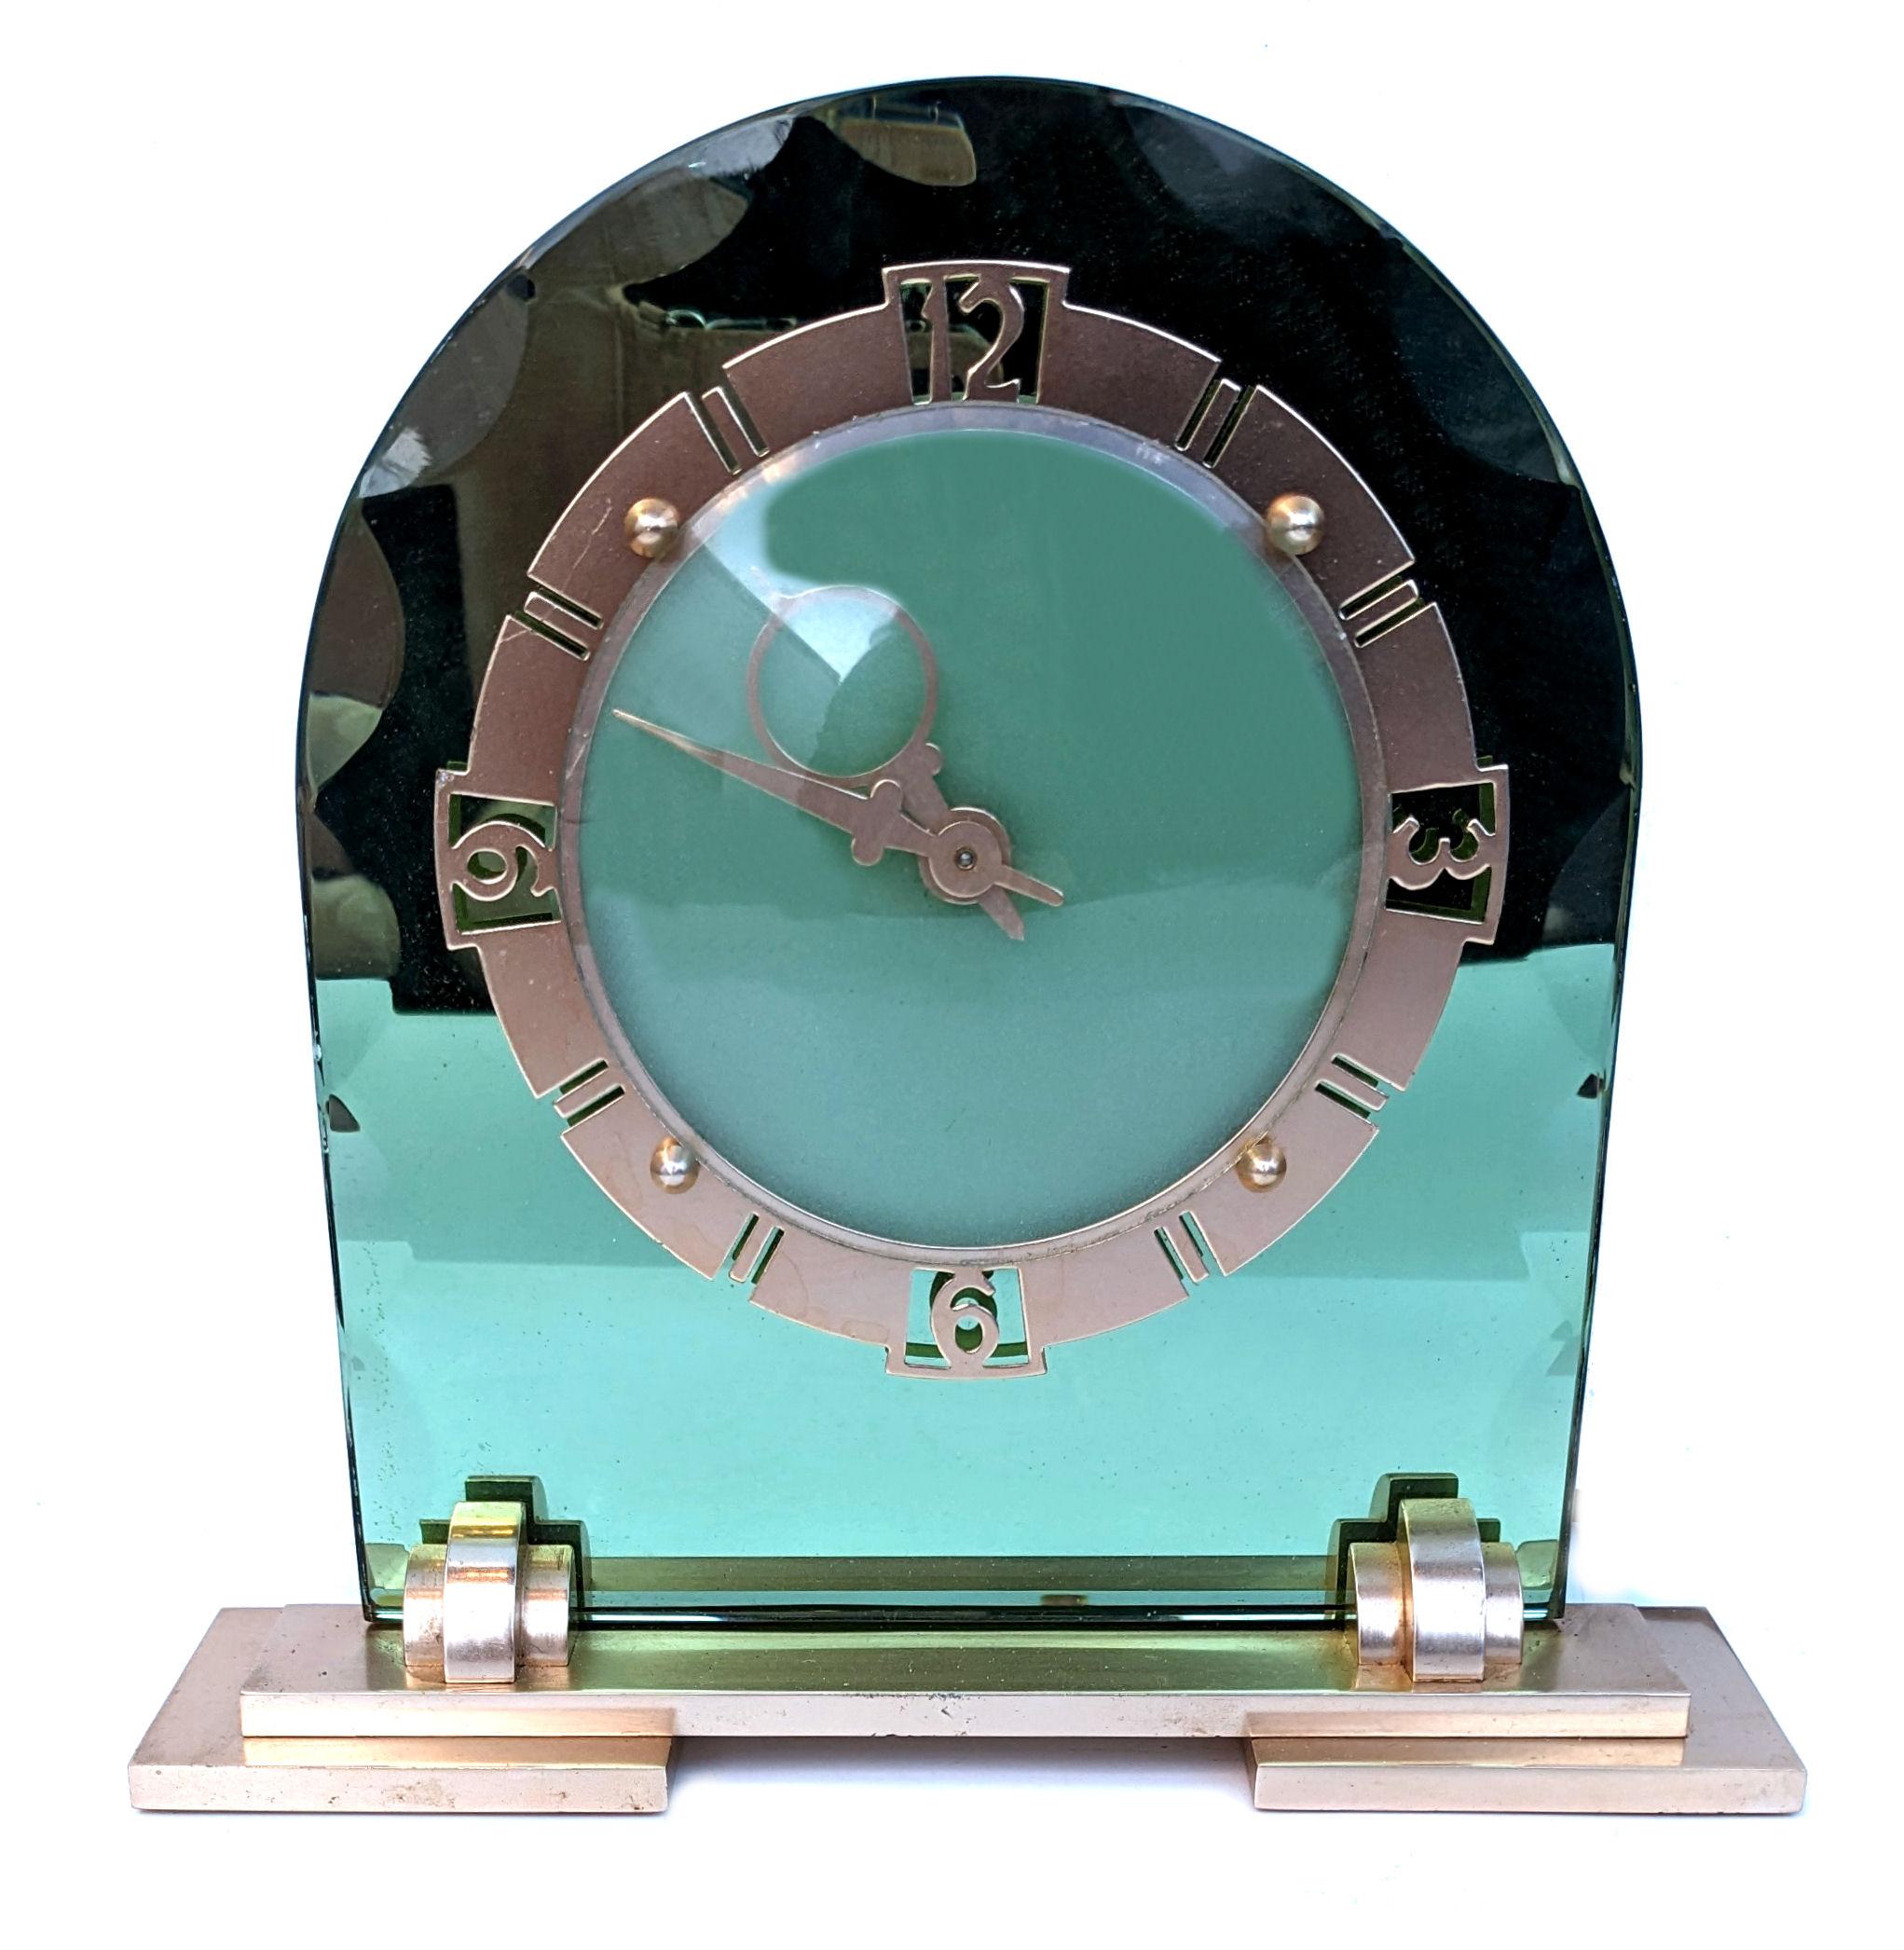 For your consideration is this green glass mirror Art Deco Clock. Lovely condition for it's age is this totally authentic 1930s Art Deco style mirror clock which originates from England. Made by Smith's English Clocks Ltd of London, Works on